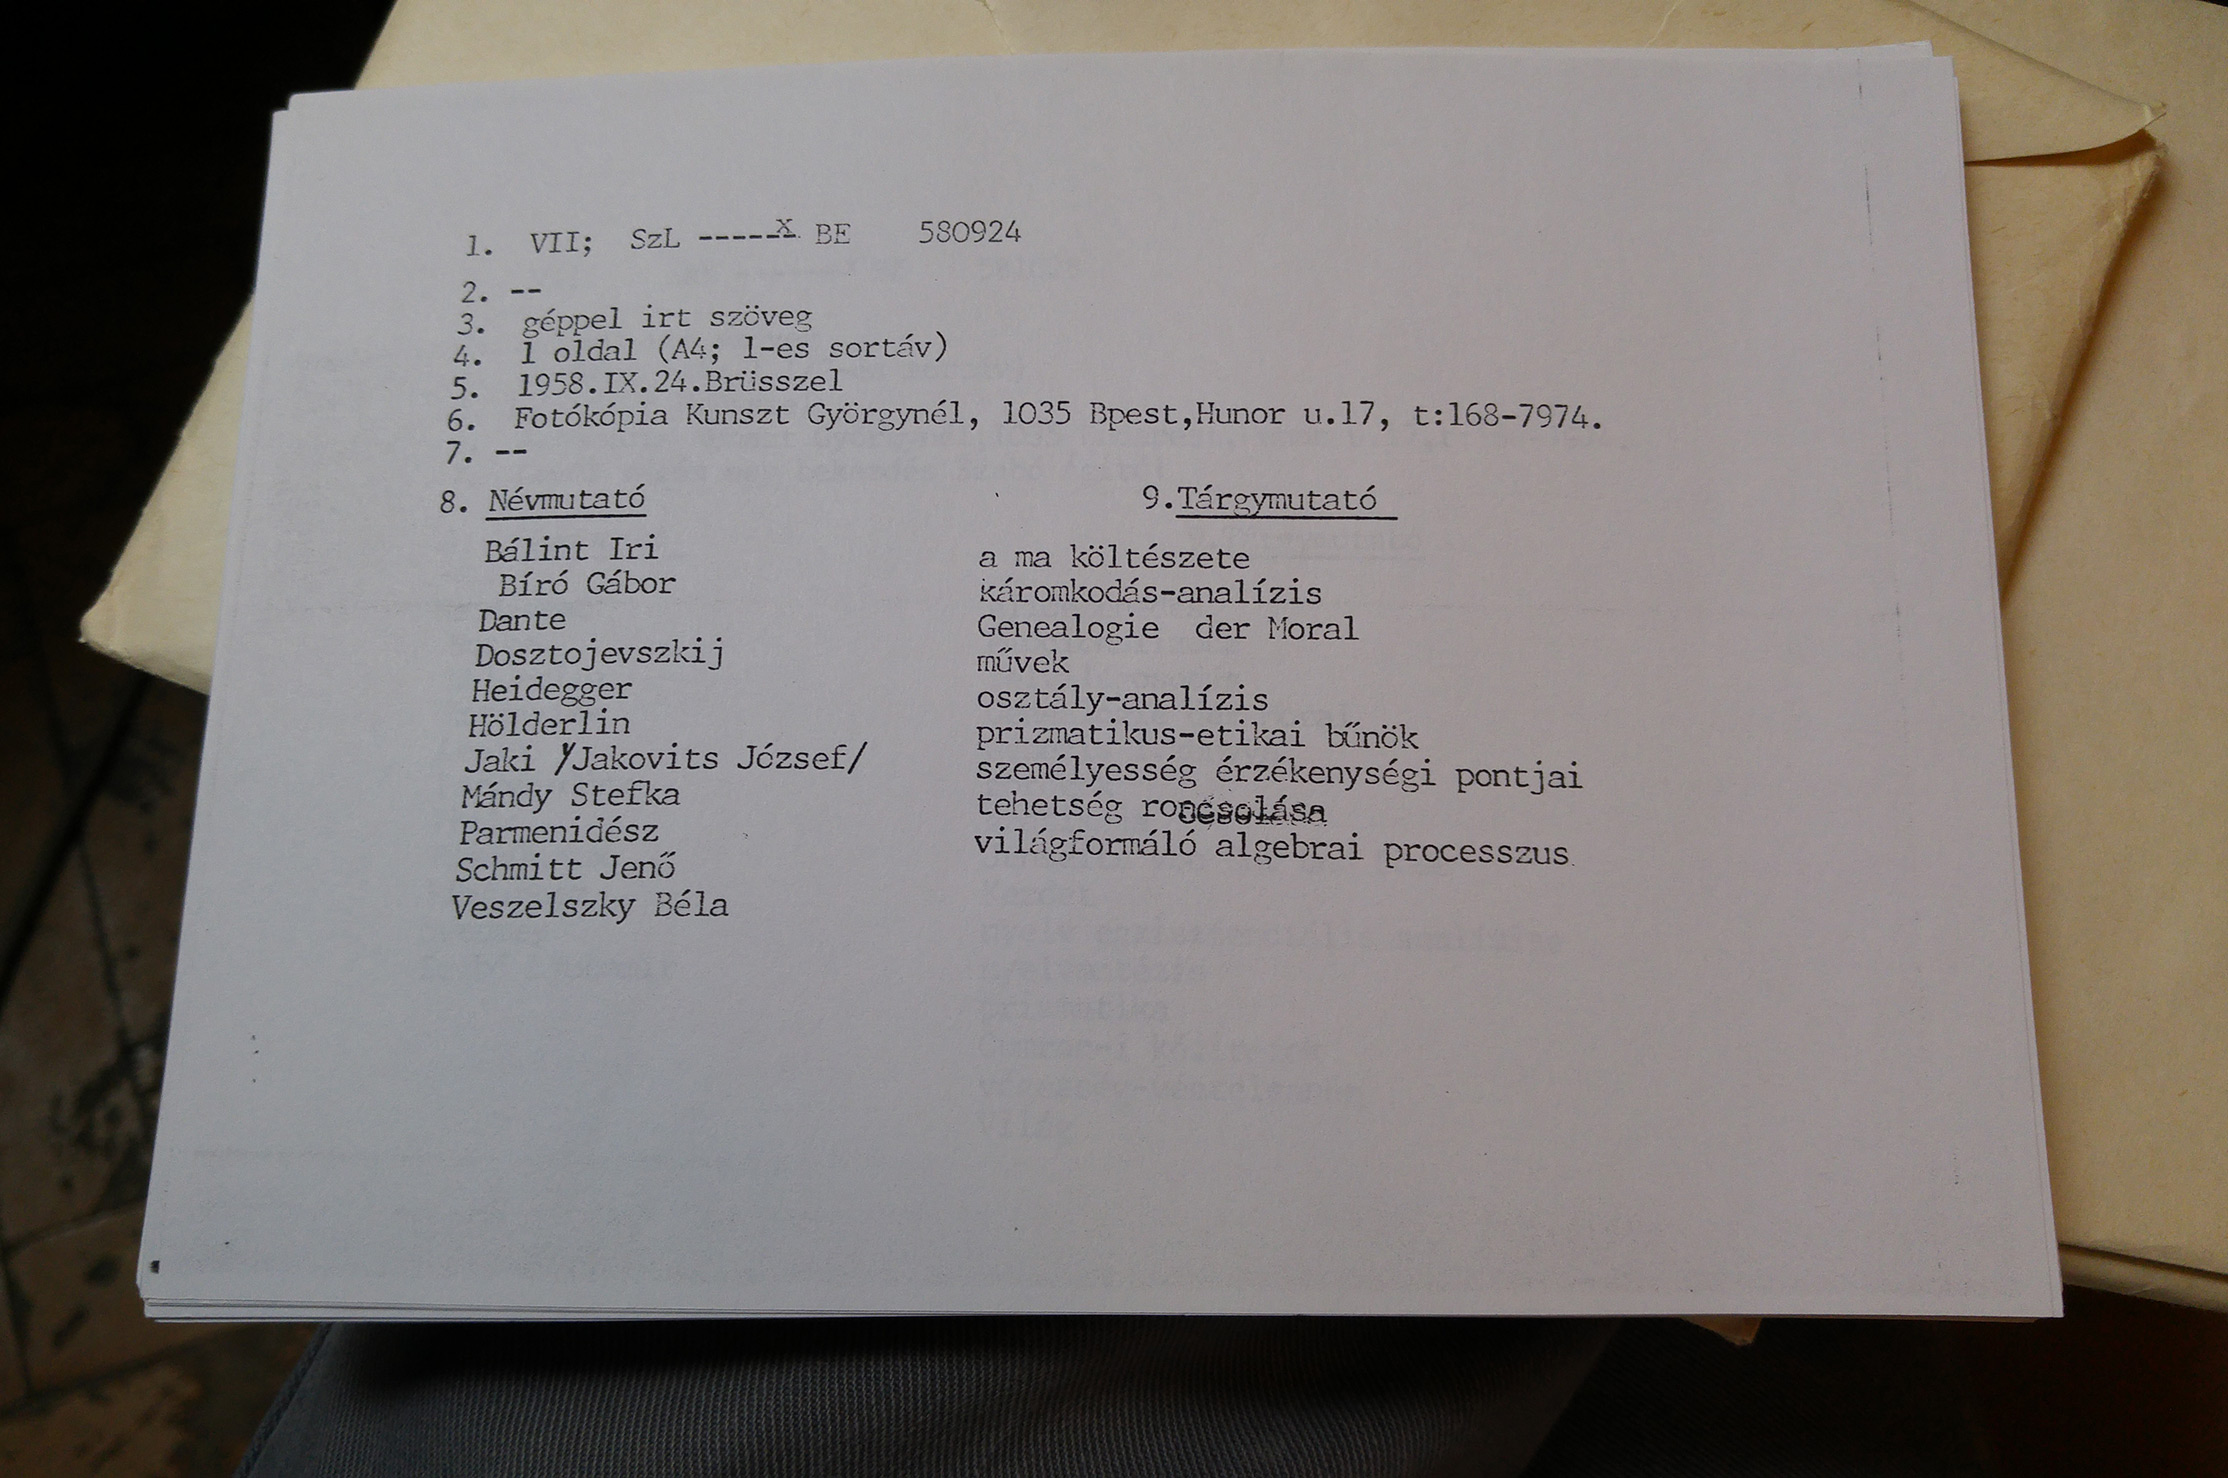 Index of a typewritten text by Lajos Szabó from 1958, compiled by György Kunszt in 1992.